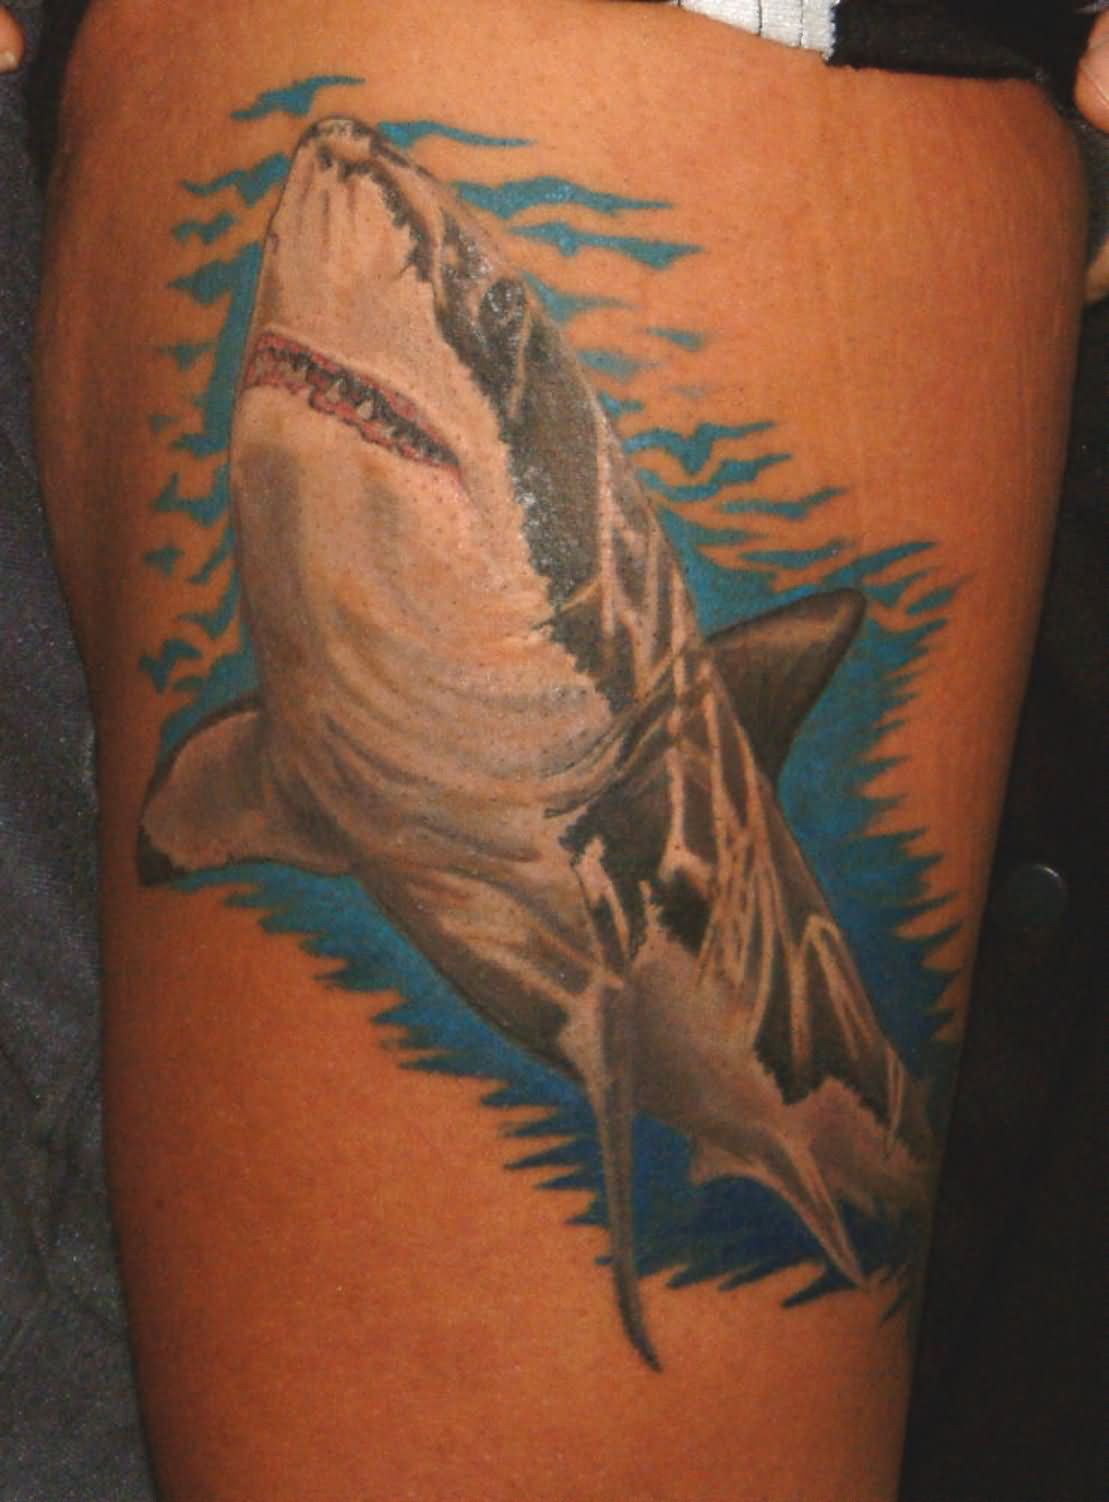 Awesome Tiger Shark Tattoo Design For Thigh